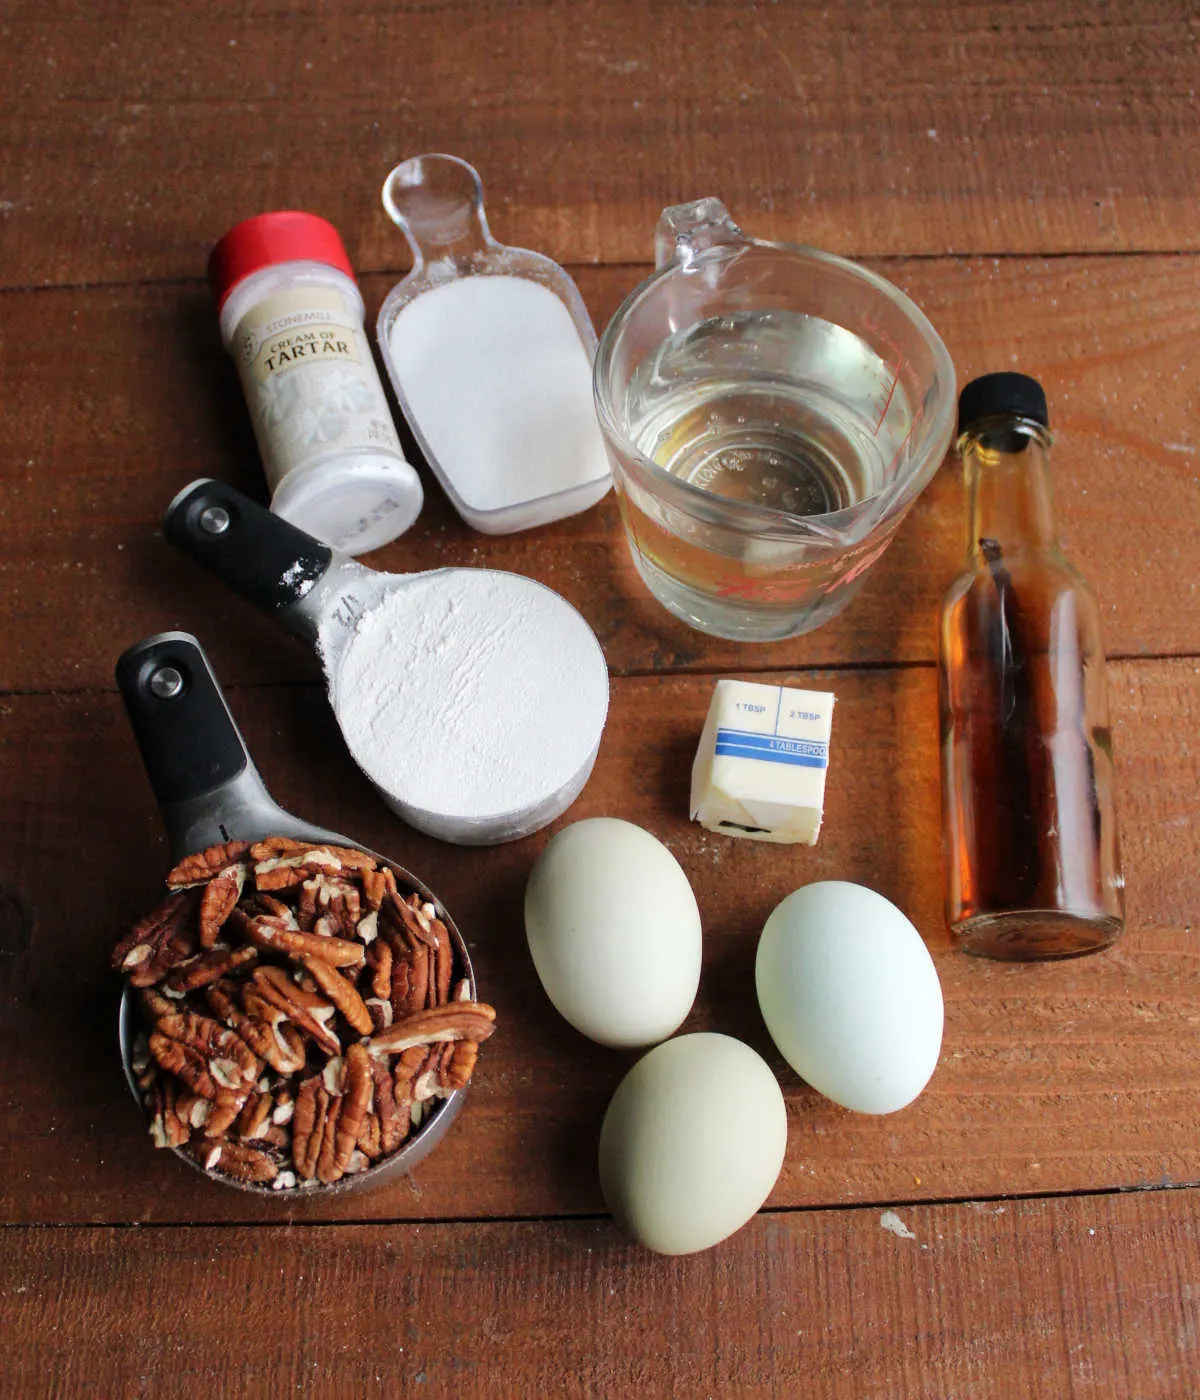 Ingredients including pecan, flour, eggs, sugar, corn syrup, butter, cream of tartar, and vanilla ready to be made into pecan pudding cake.